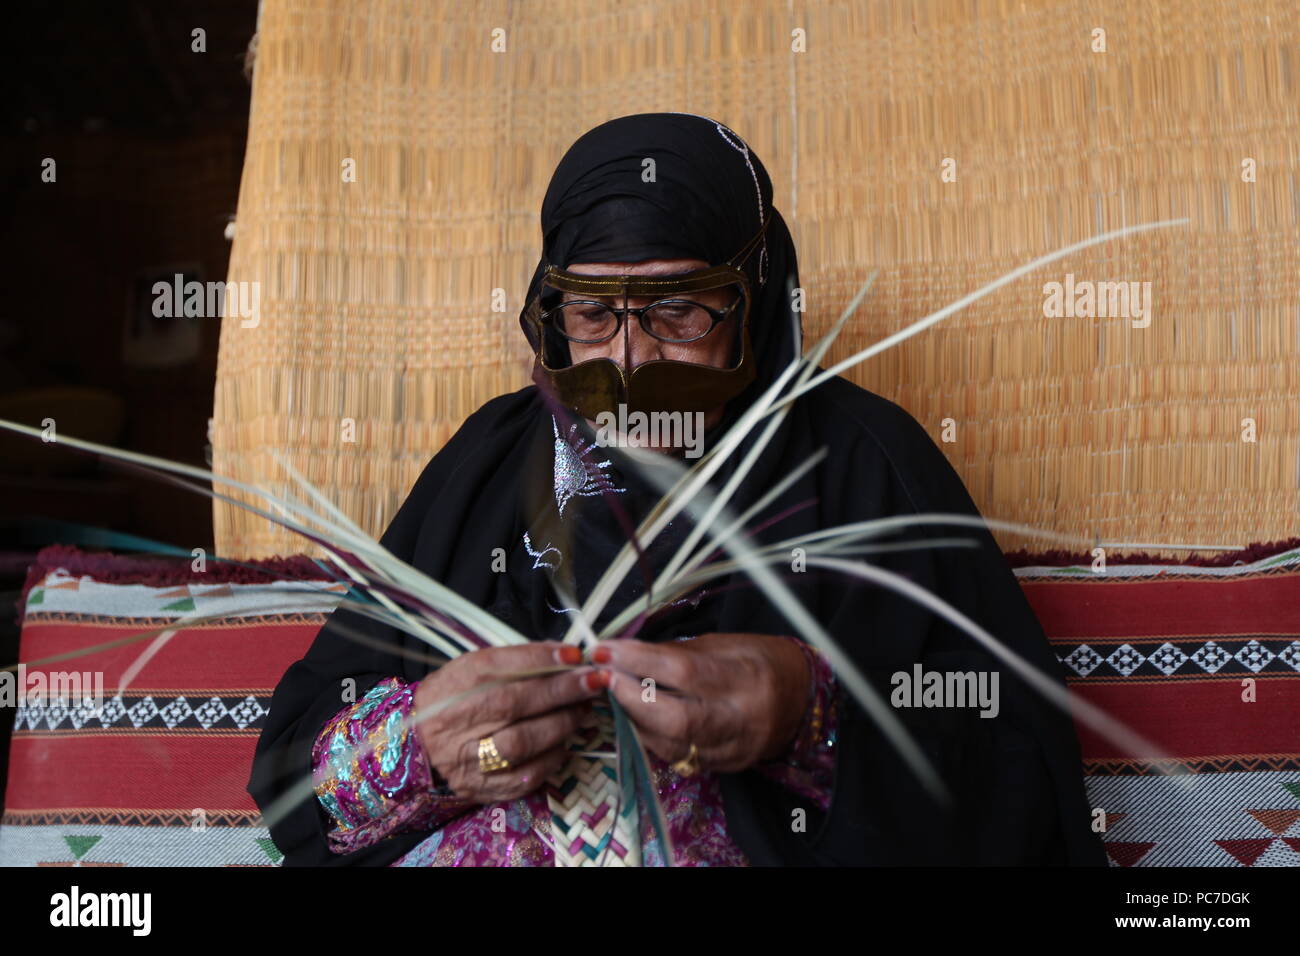 A UAE woman, sporting a metallic burqa with henna died fingers, weaves straw baskets and mats out of palm leaves at the heritage village in Fujairah. Stock Photo